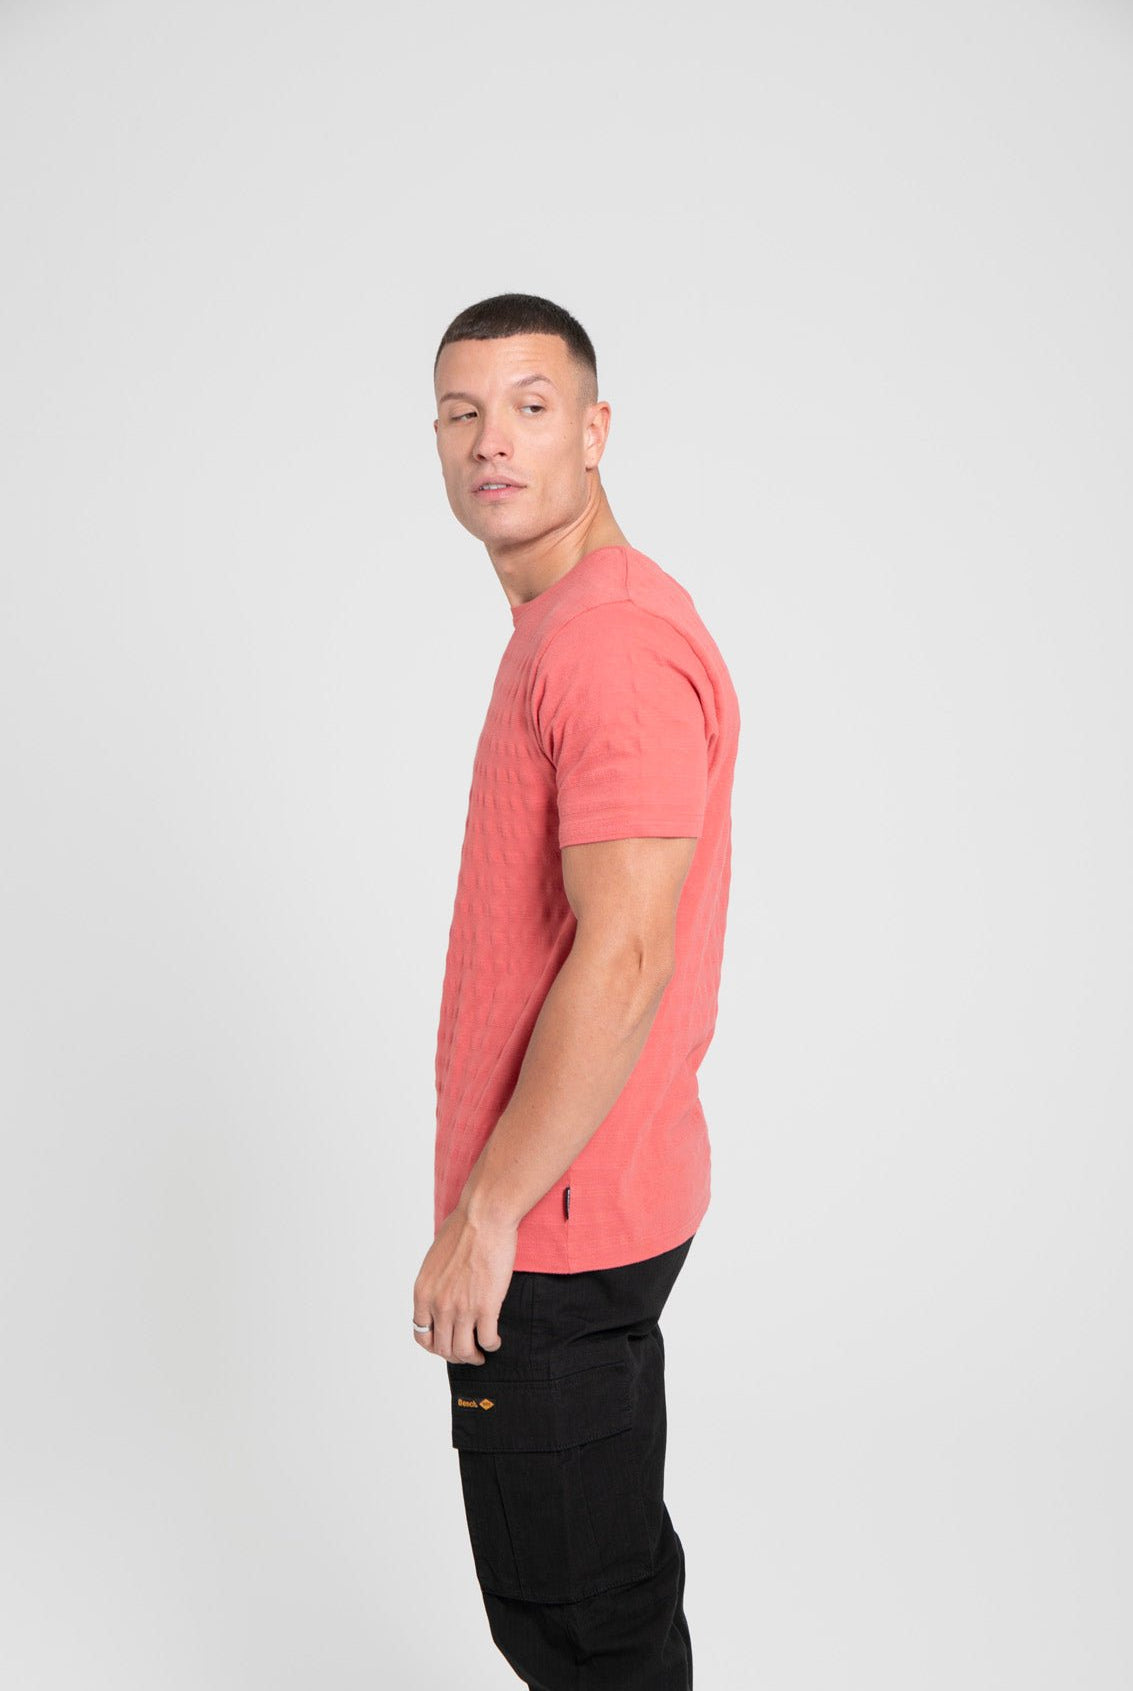 Mens 'SARRI' T-Shirt - WASHED OUT RED - Shop at www.Bench.co.uk #LoveMyHood